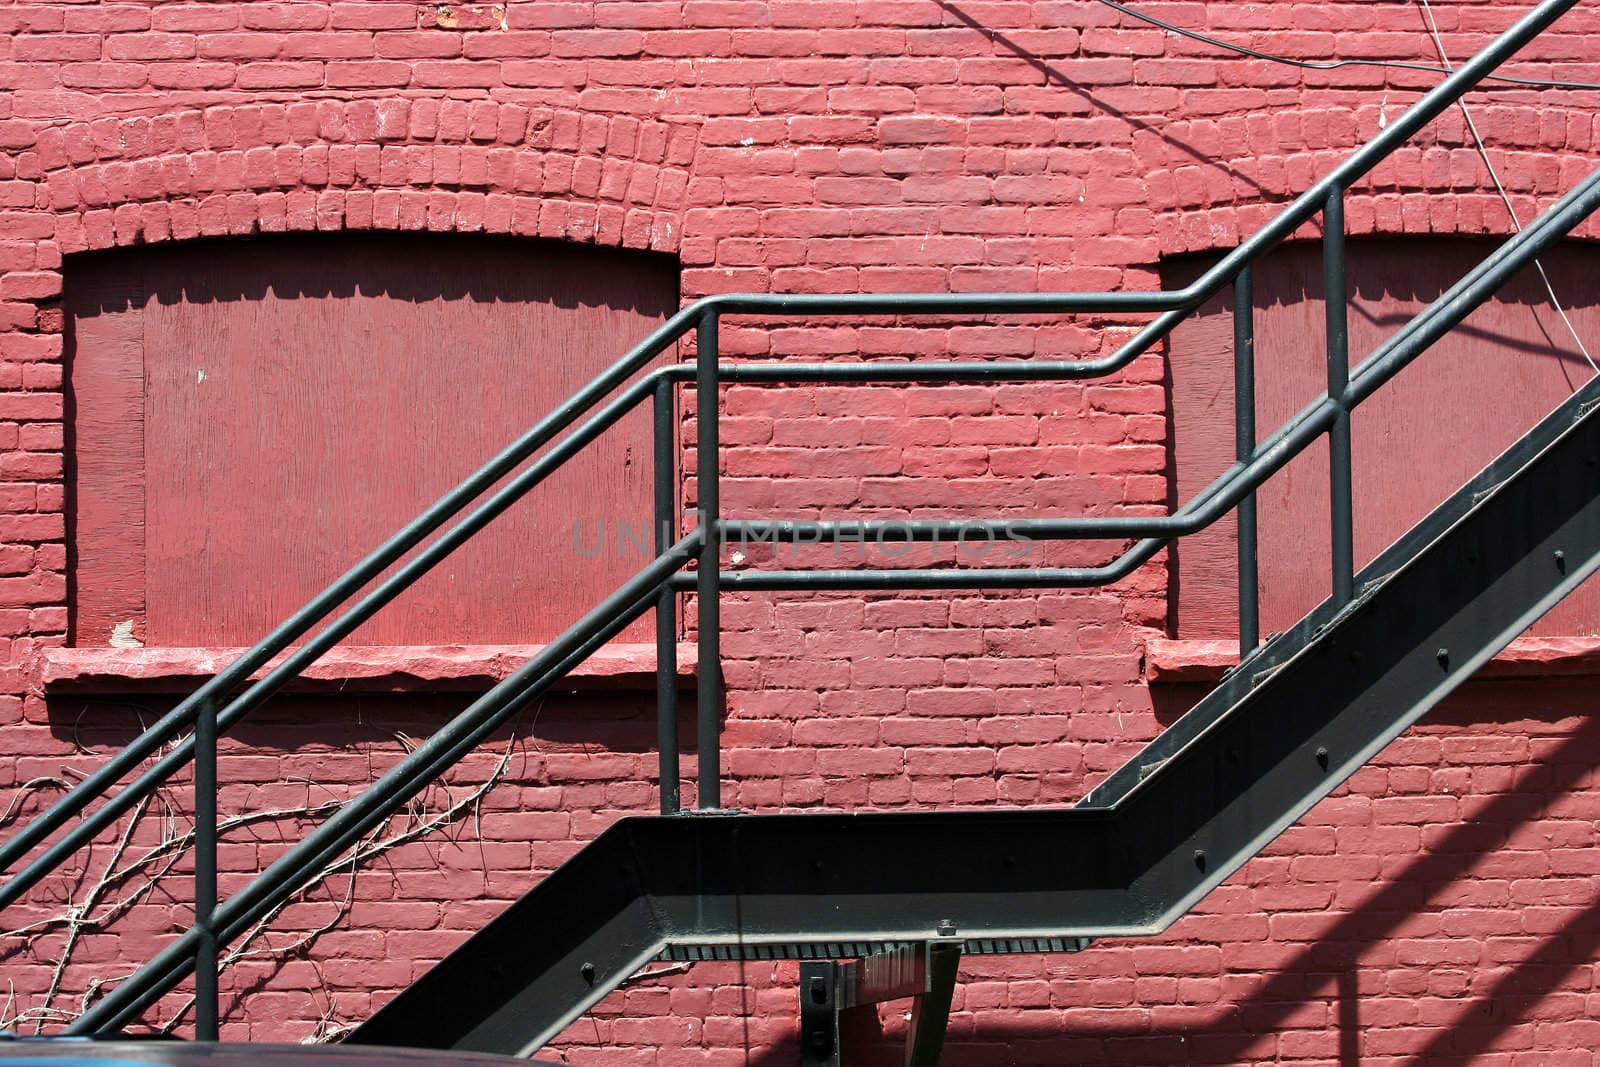 A Fire escape on the side of a building